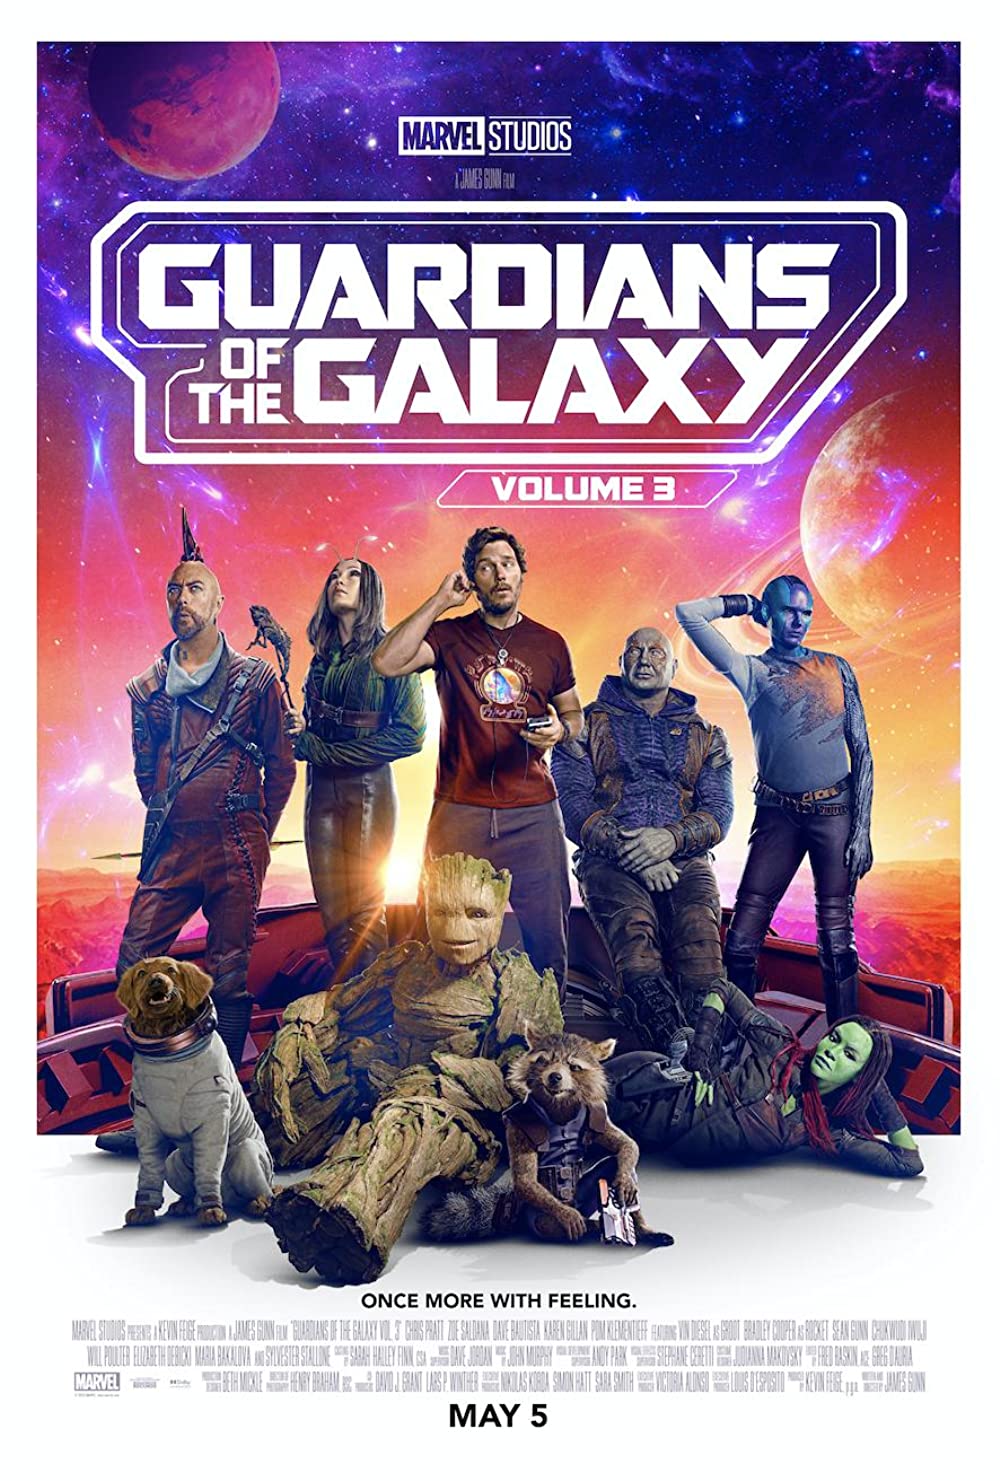 Guardians of the Galaxy Vol. 3 Cinema Release